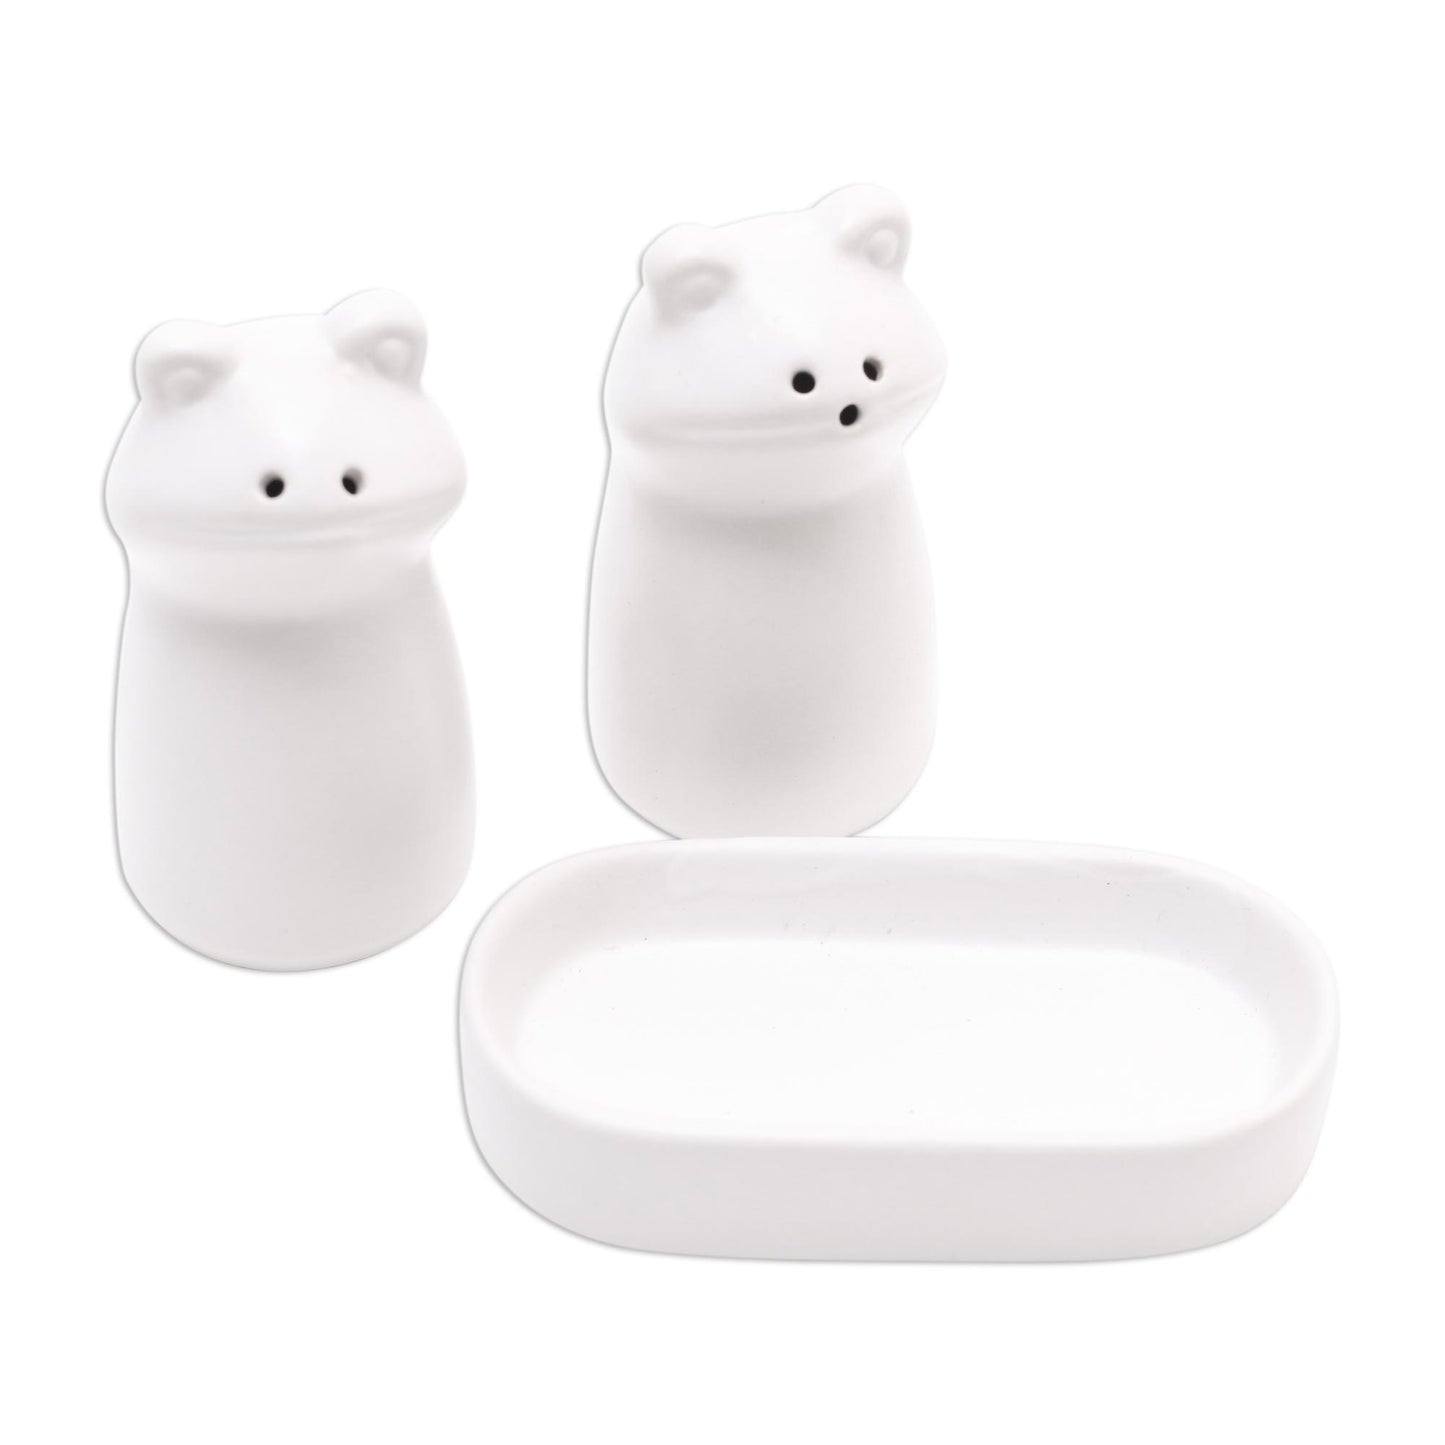 Fanciful Frogs in White Matte White Ceramic Frog Salt and Pepper Shakers with Tray